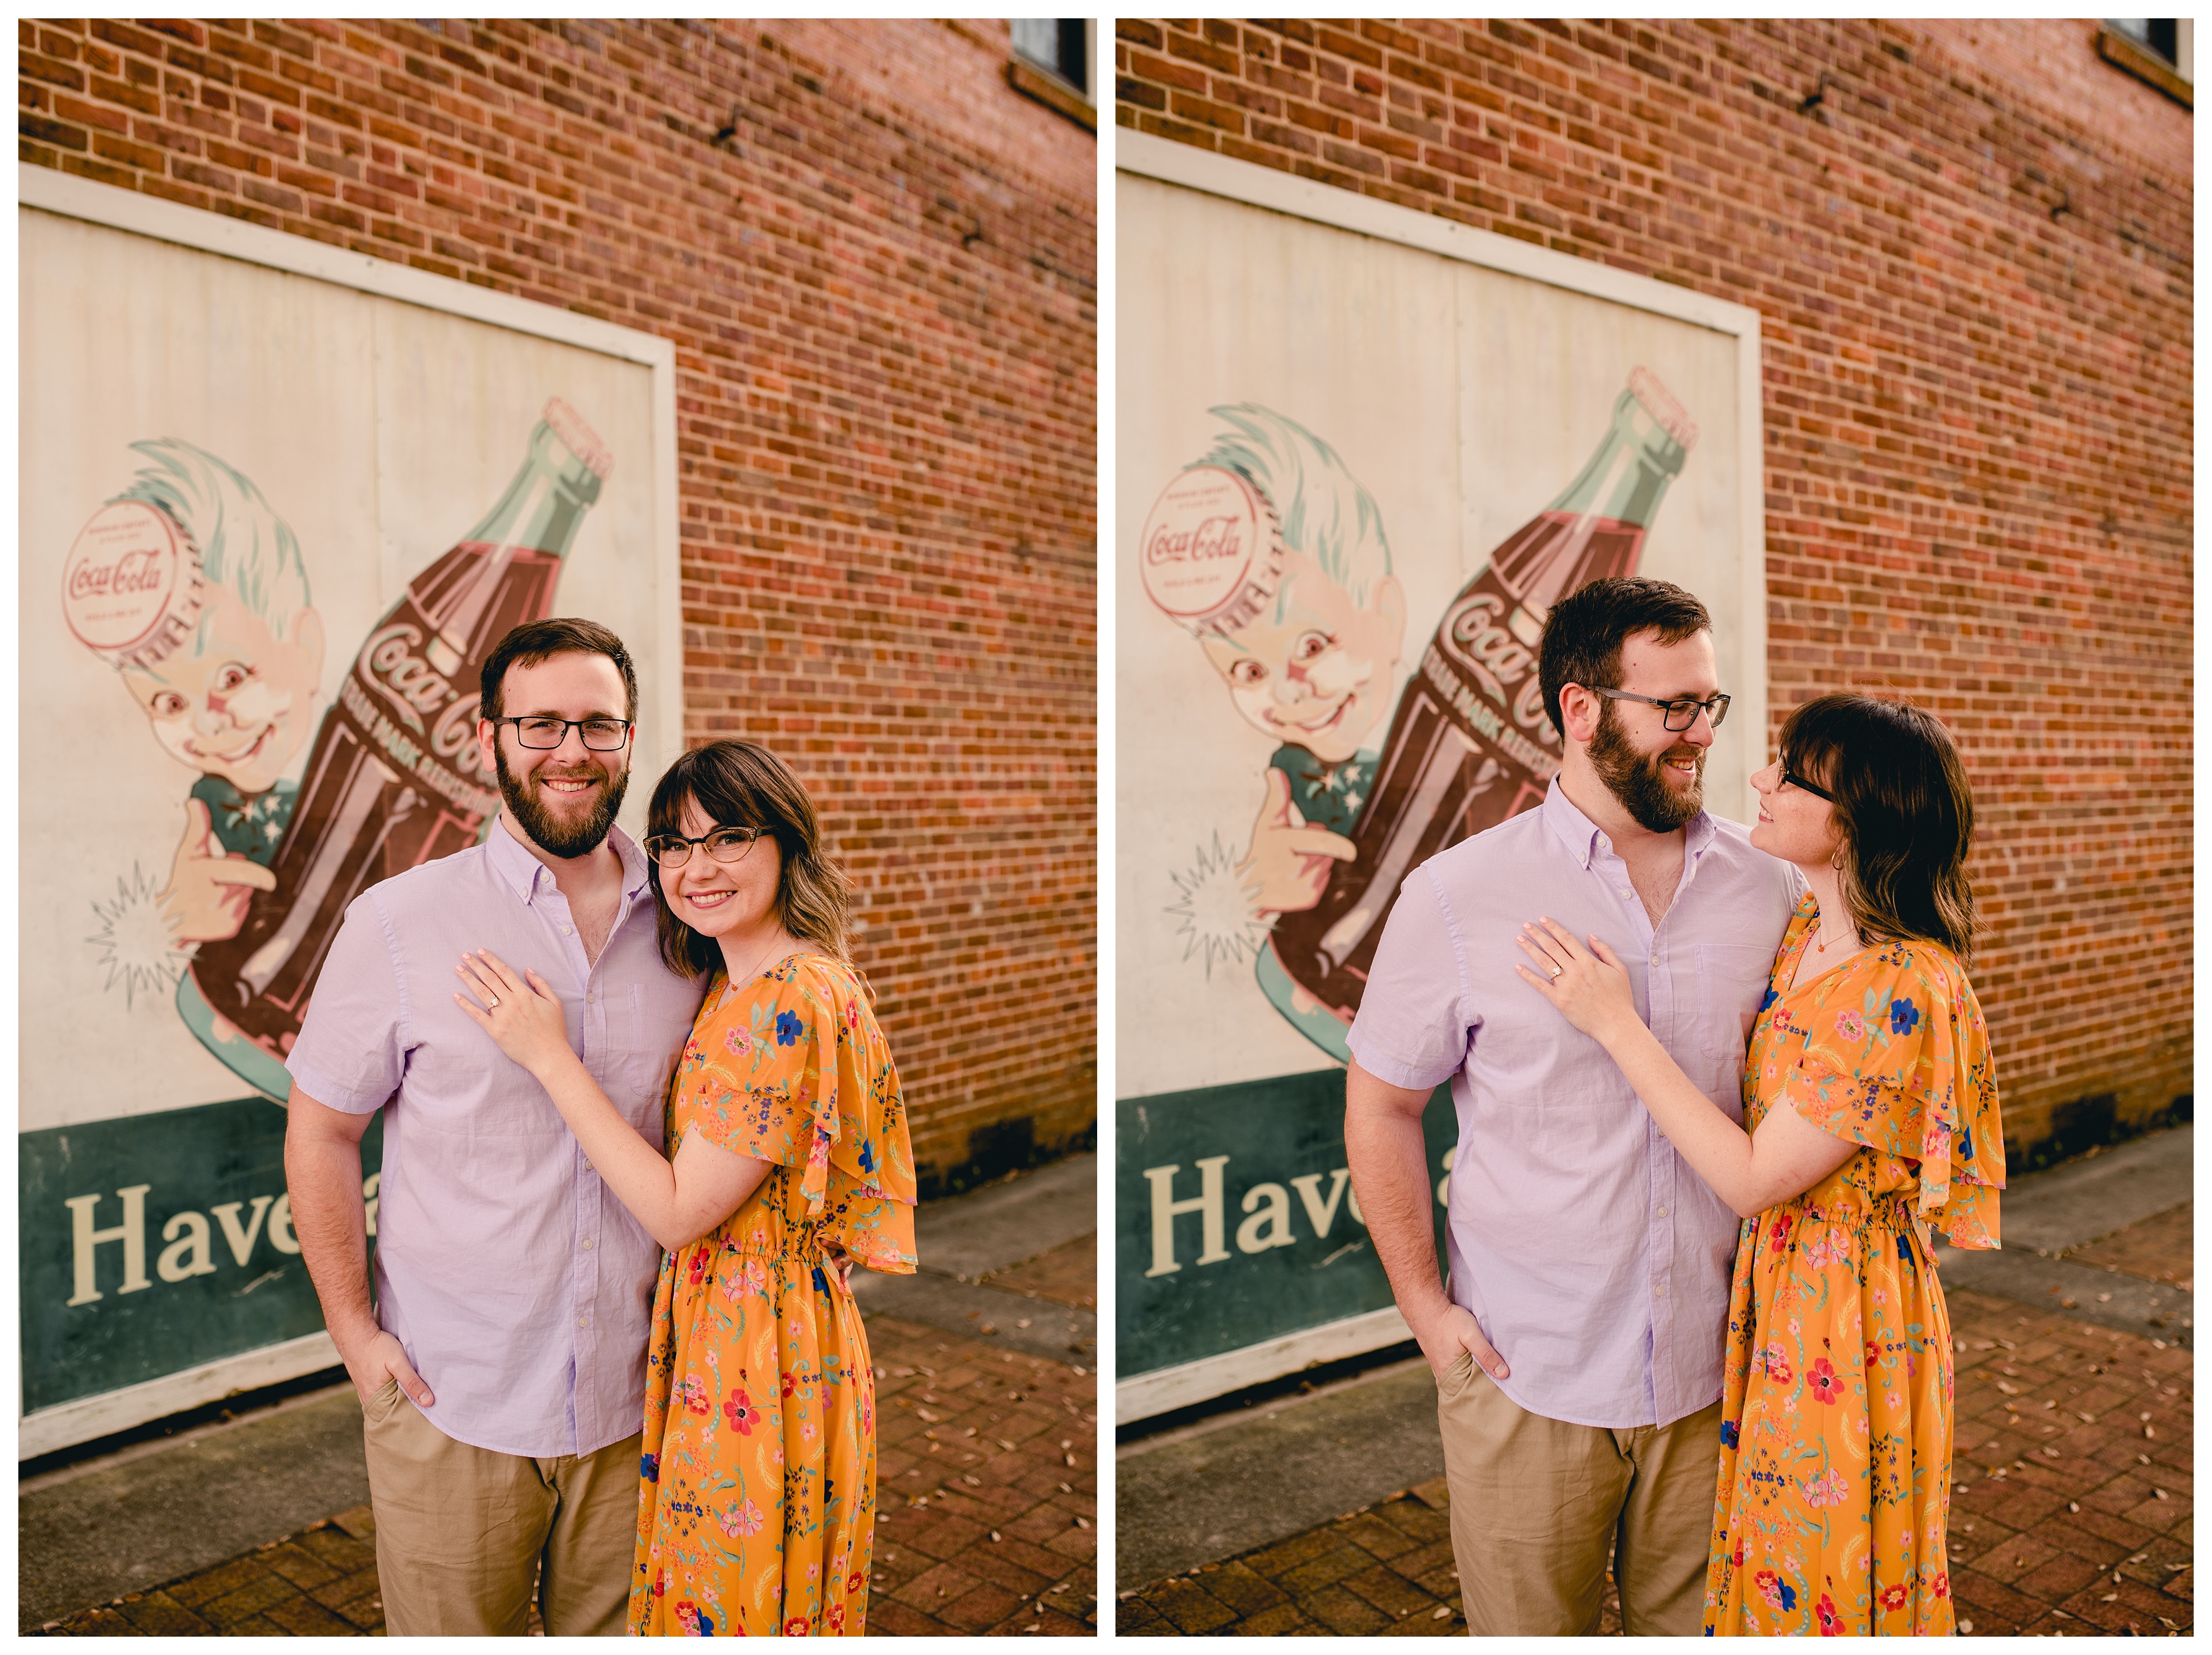 Engagement session in Madison, FL in front of old Coca Cola sign. Shelly Williams Photography